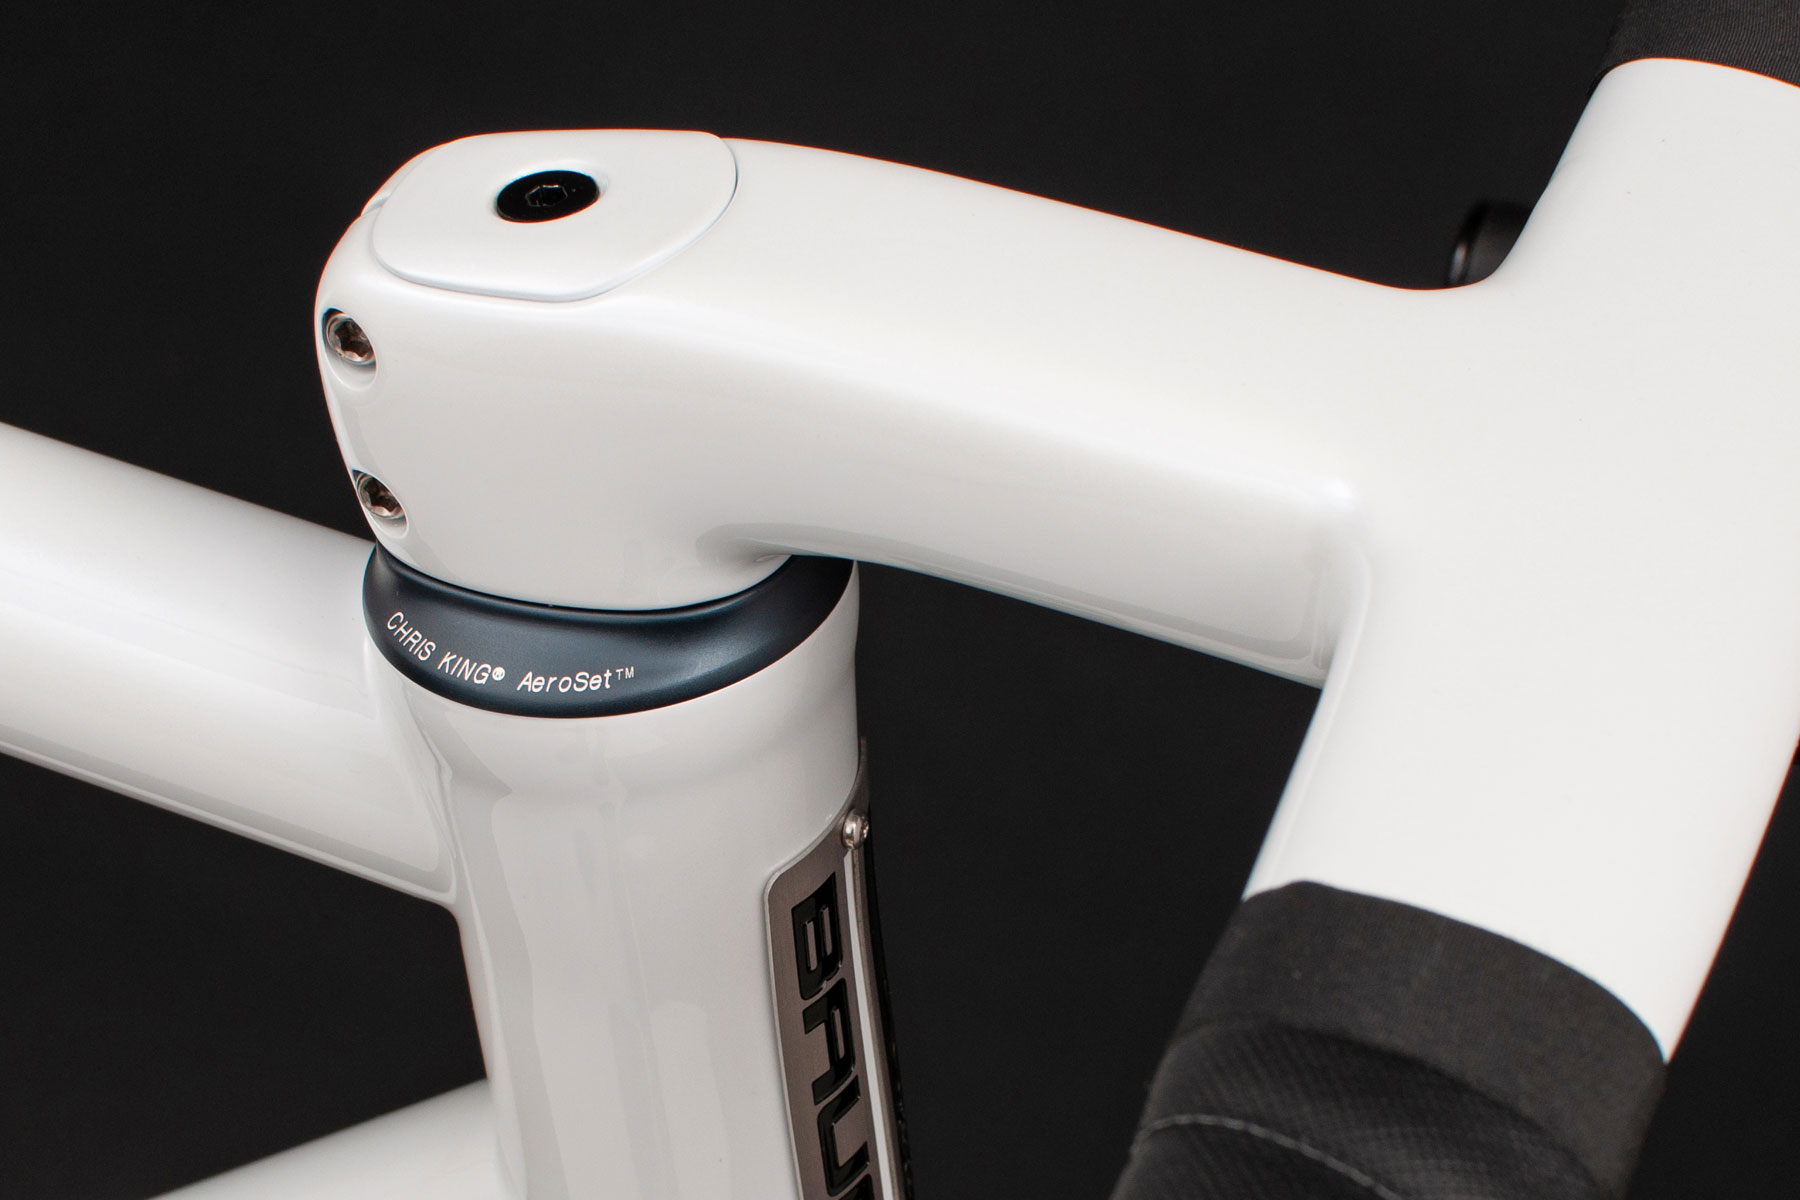 Chris King AeroSet 1, 2, 3… Fully Integrated Cable Routing For All in More Headset Options